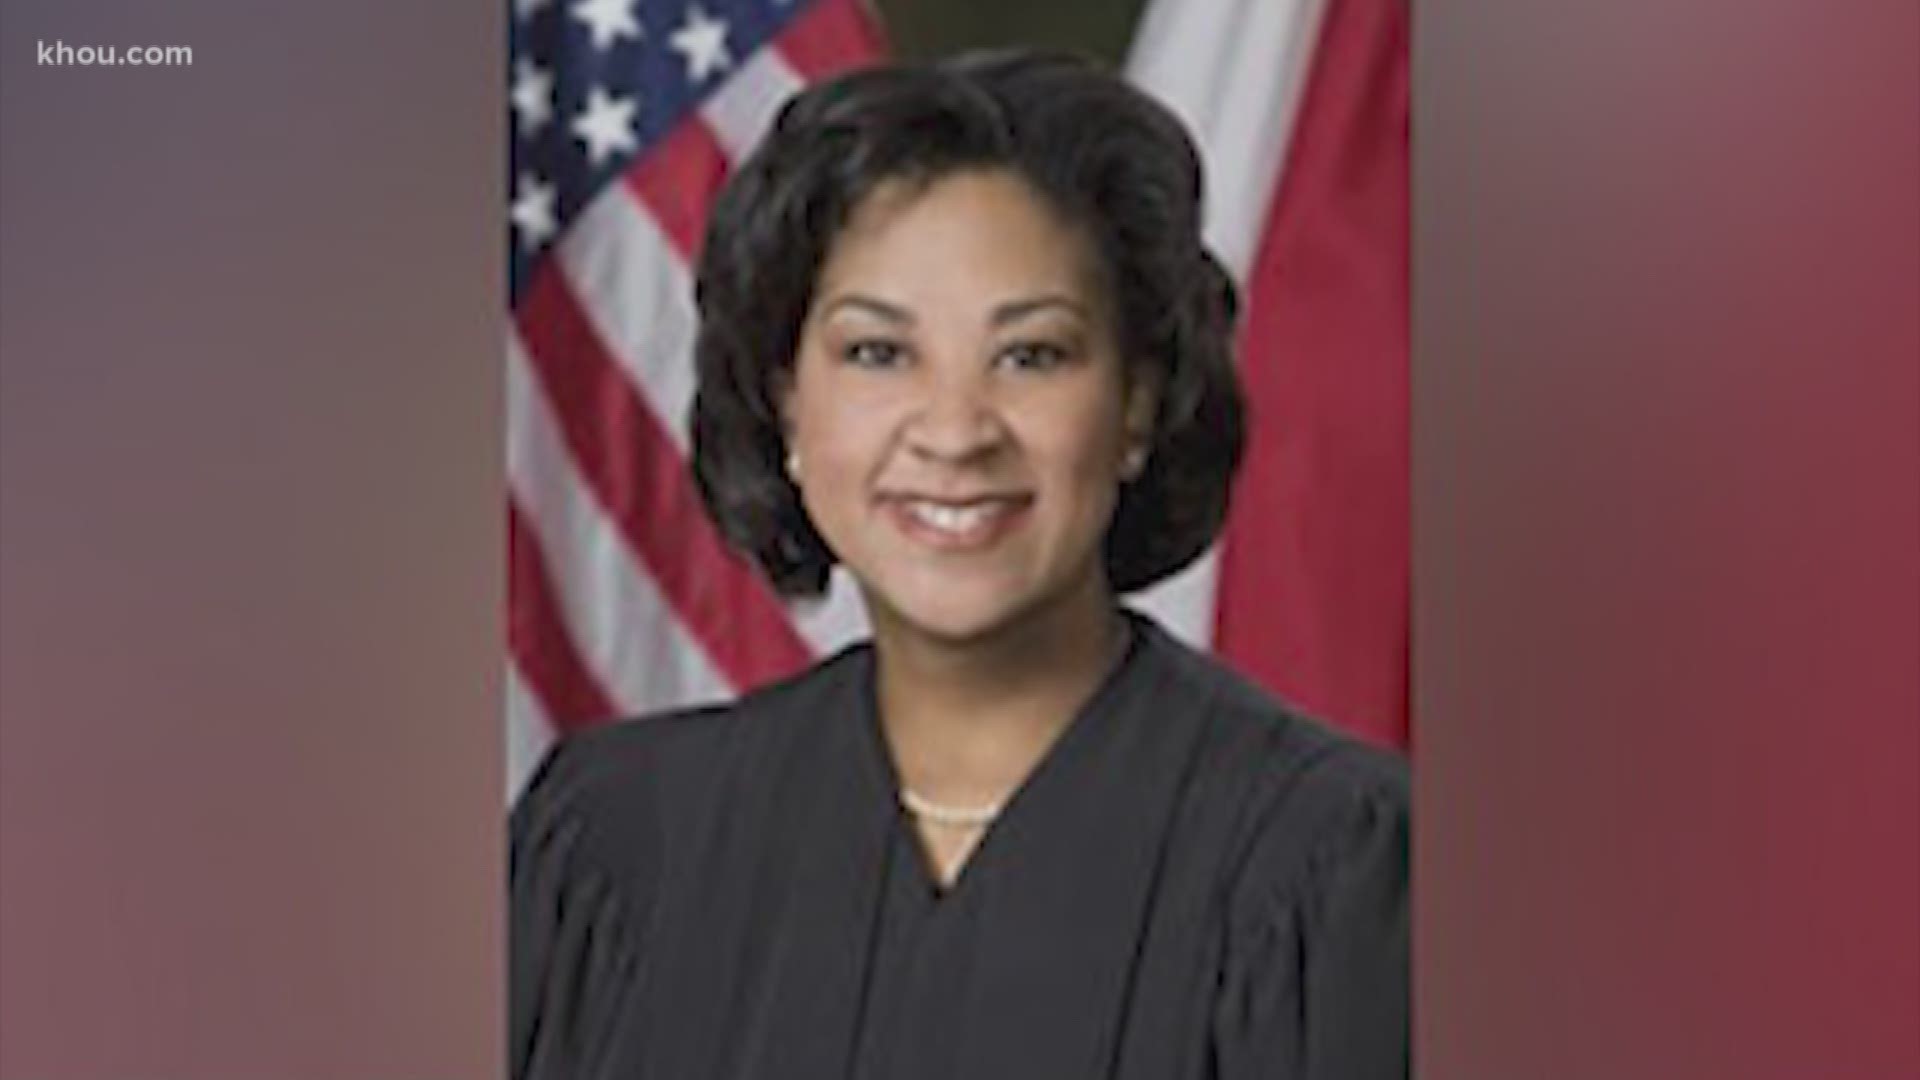 Judge Alexandra Smoots-Thomas, the presiding judge for the 164th District Court, is charged with seven counts of wire fraud.